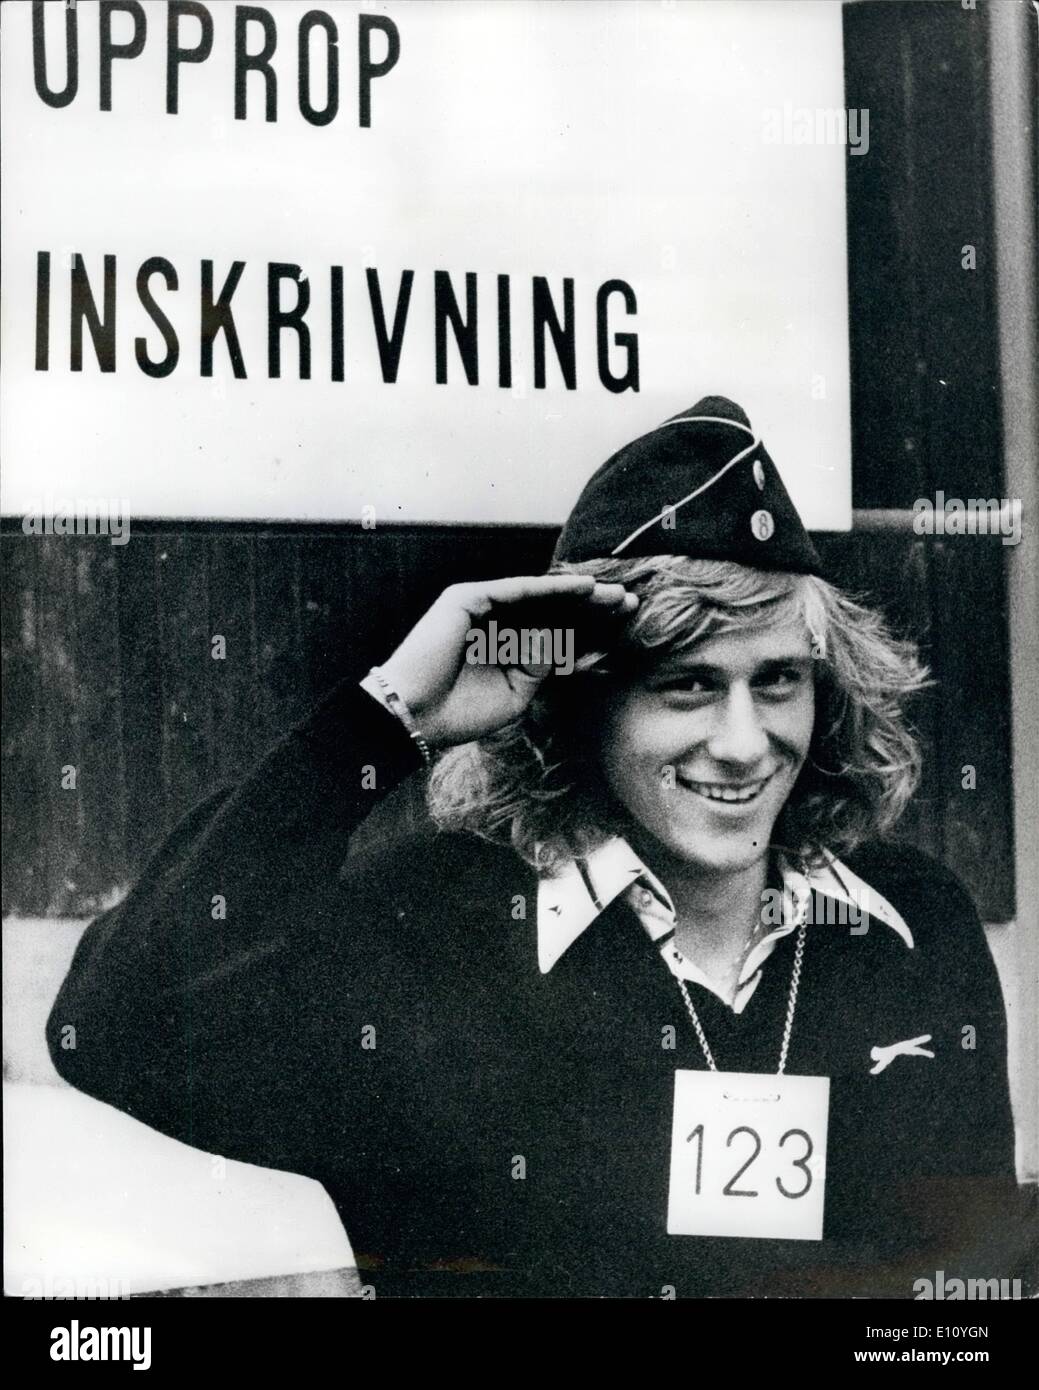 Oct. 10, 1974 - Bjorn Borg reports at Army National Service Centre.: Like  other Swedish 18-year old, Bjorn Borg, the young golden boy of tennis, this  week reported to an Army national